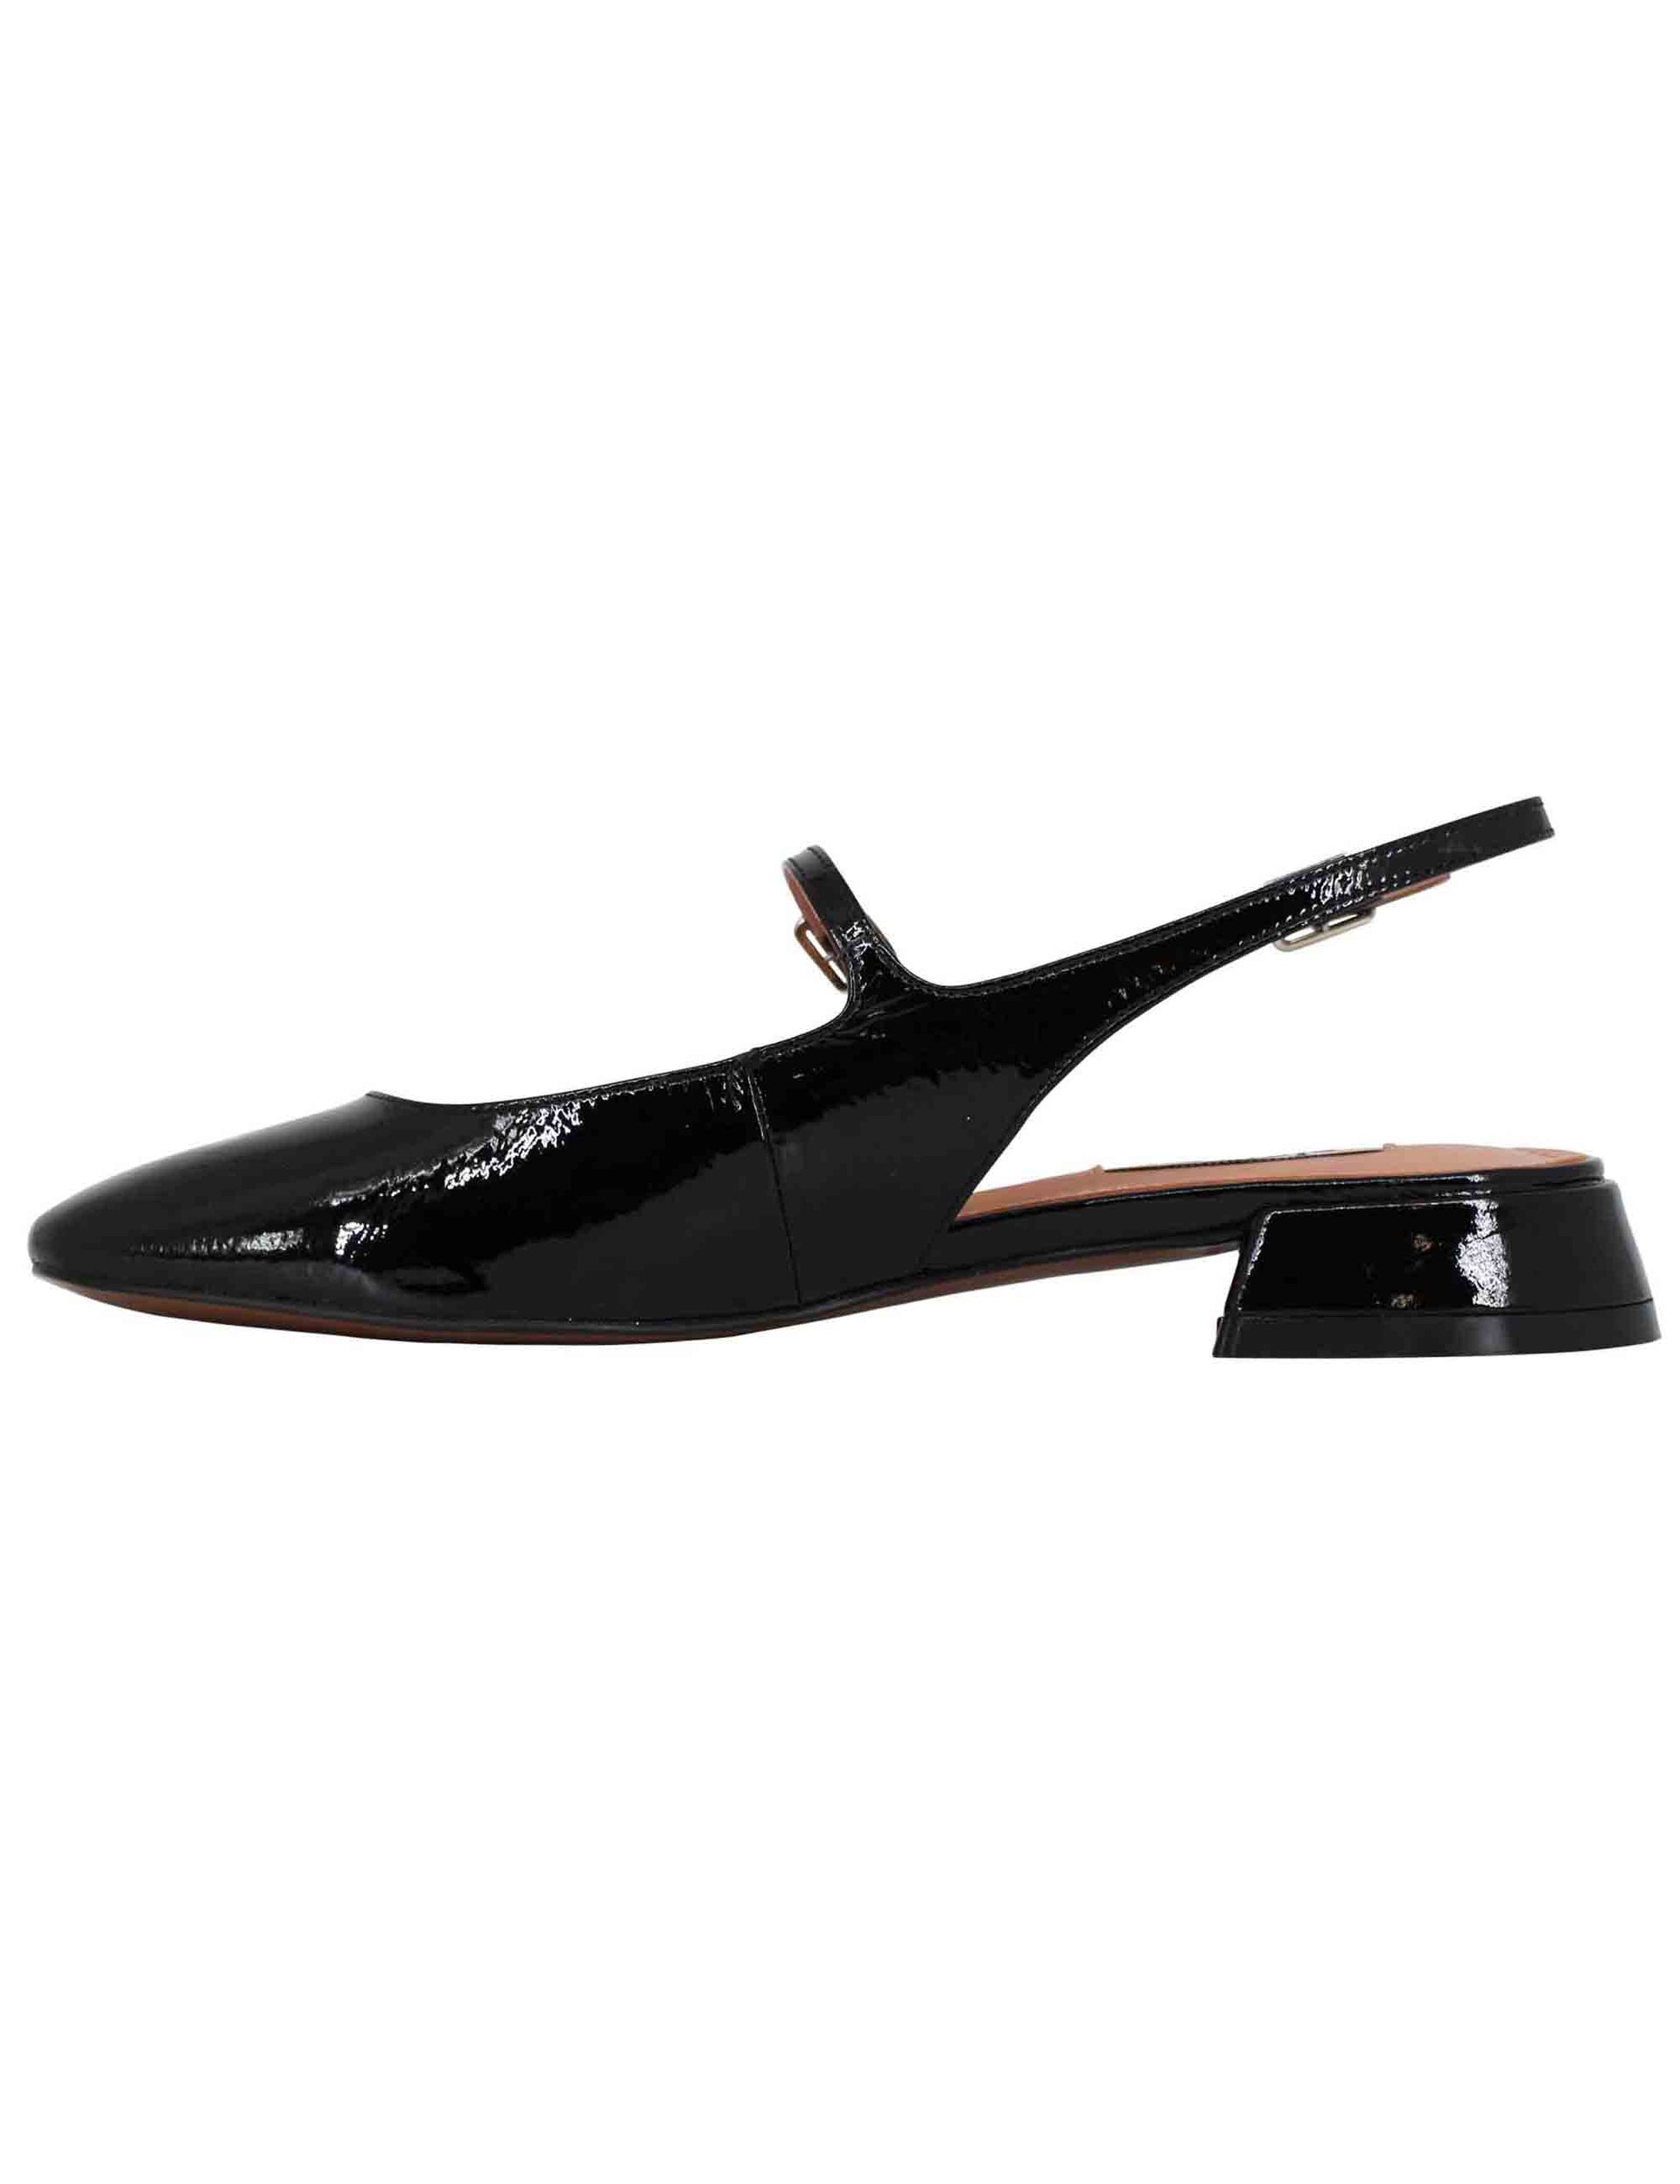 Women's slingback pumps in black patent leather with strap on the instep Ava